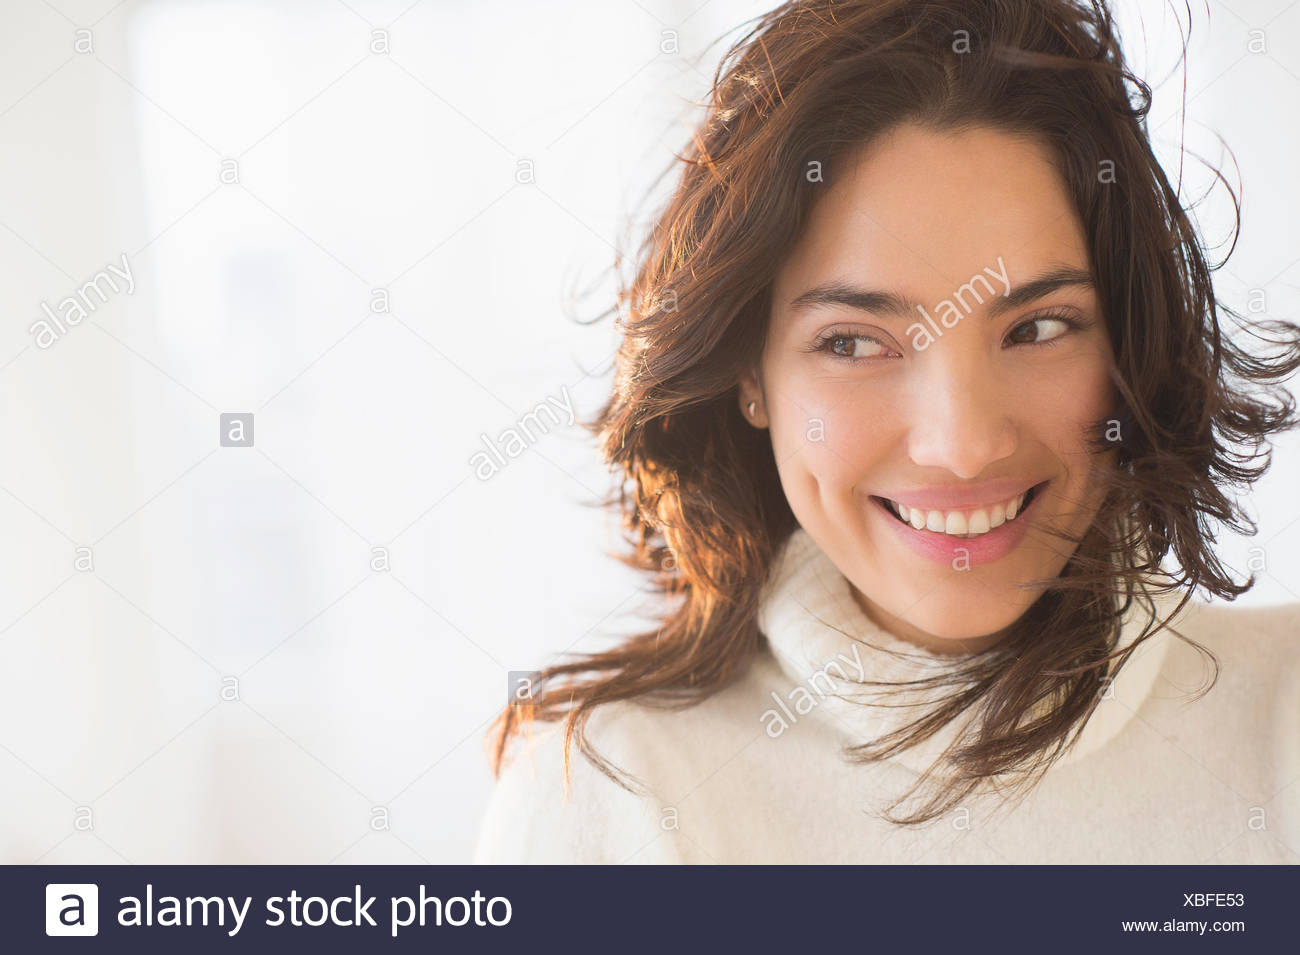 Eyes Looking Sideways High Resolution Stock Photography and Images - Alamy